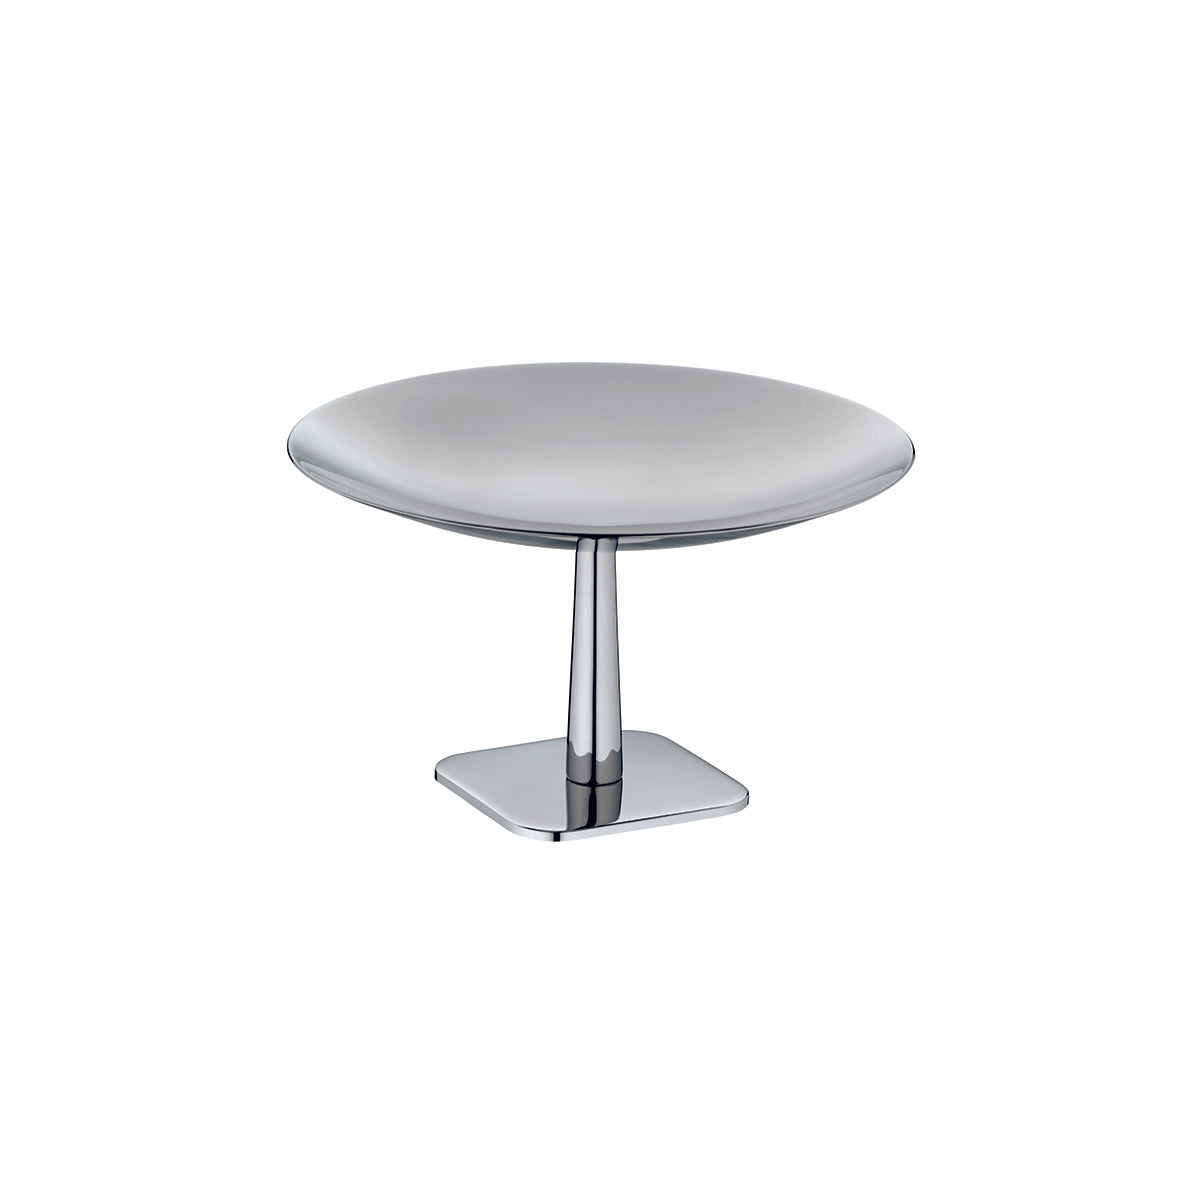 55.0067.6040 WMF Urban Petit-Fours Plate Stand Stainless Steel Tomkin Australia Hospitality Supplies